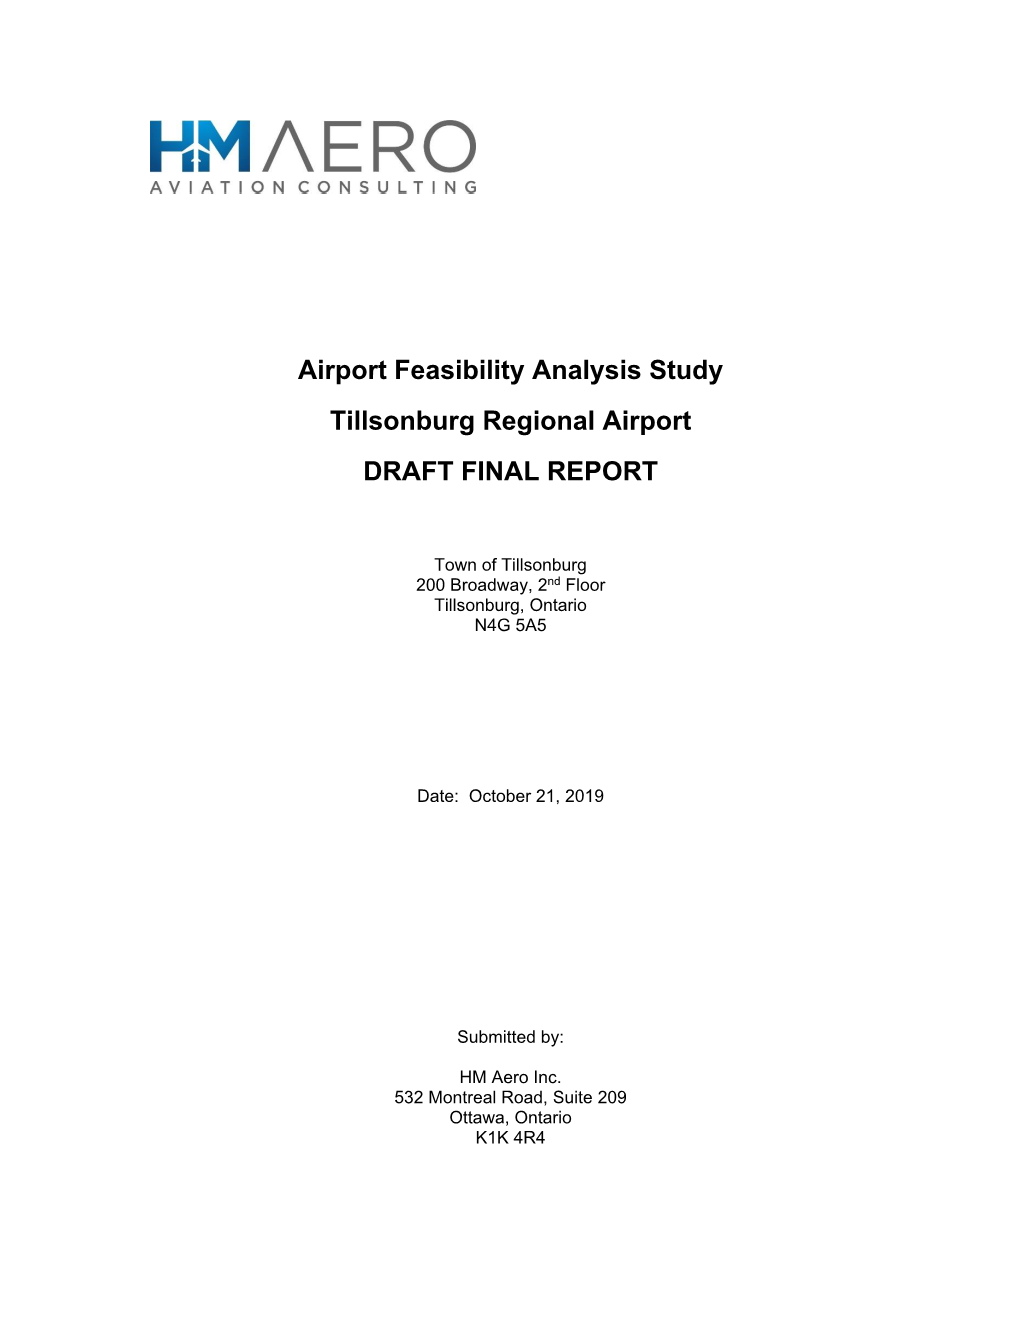 Airport Feasibility Analysis Study Report.Pdf